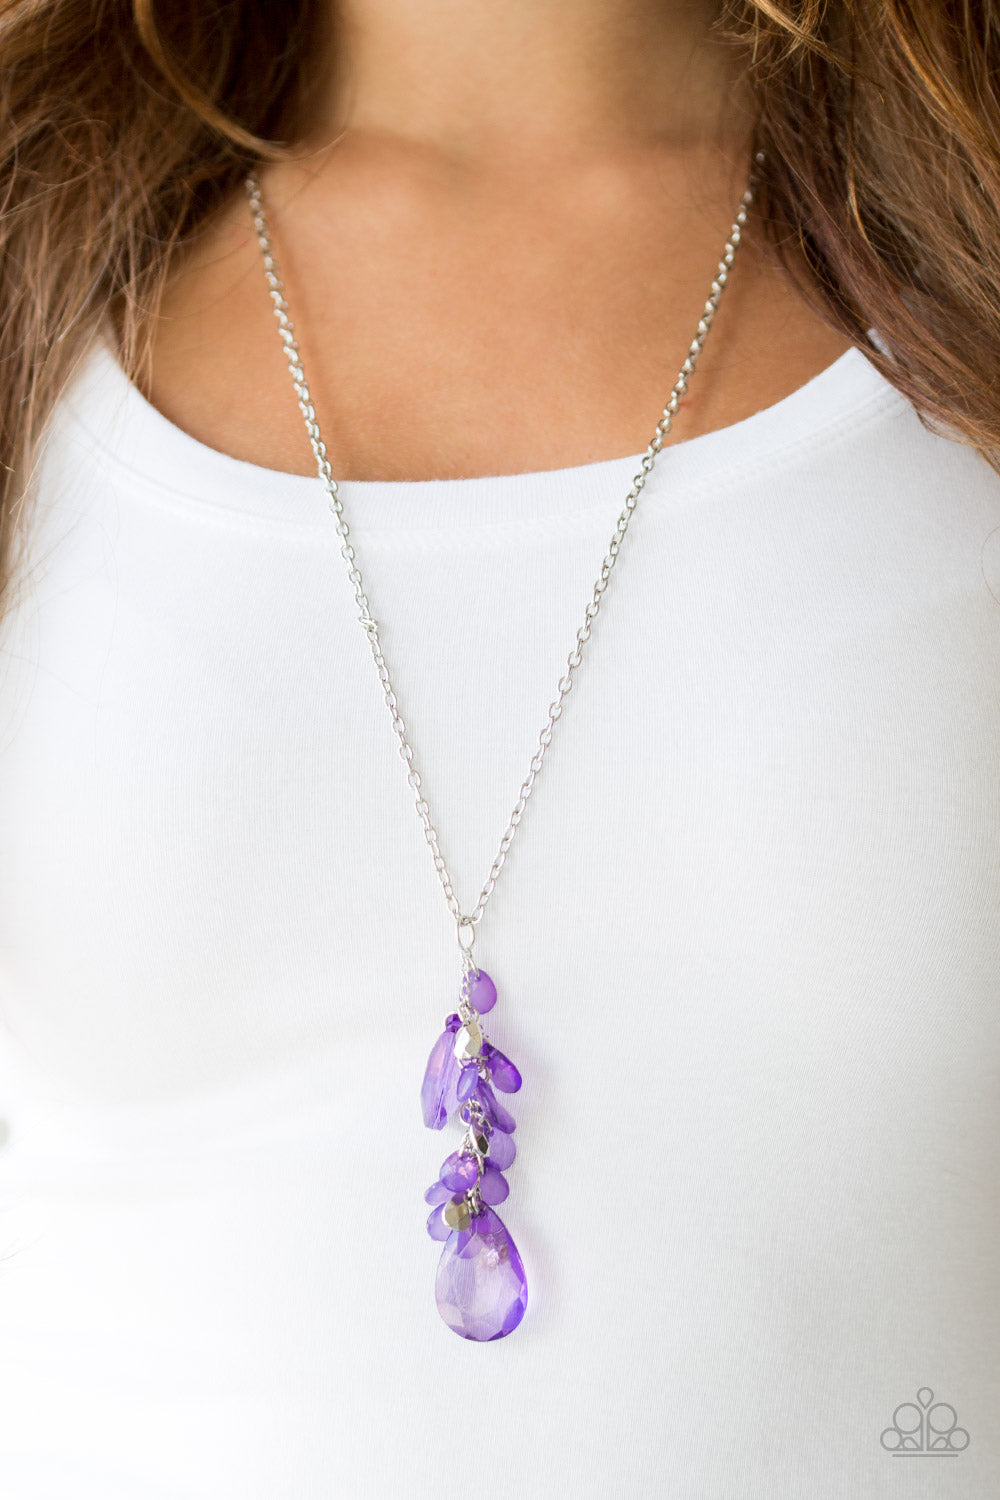 SUMMER SOLO - PURPLE CLUSTER NECKLACE